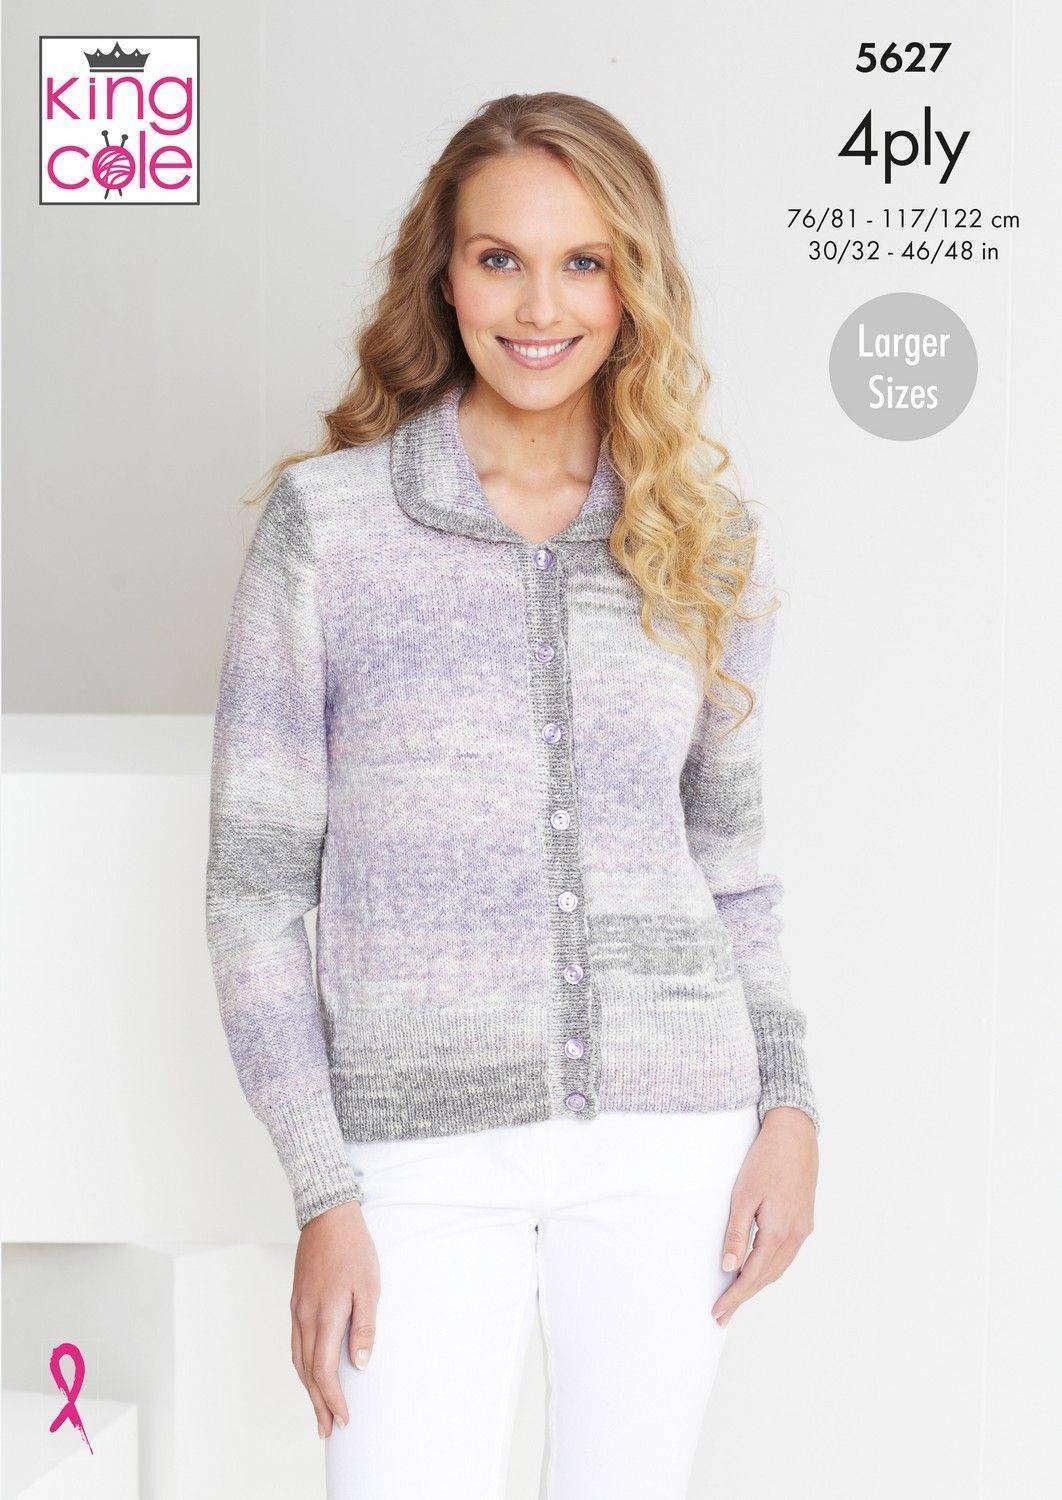 Cardigan and Top in King Cole Drifter 4 Ply (5627) | The Knitting Network